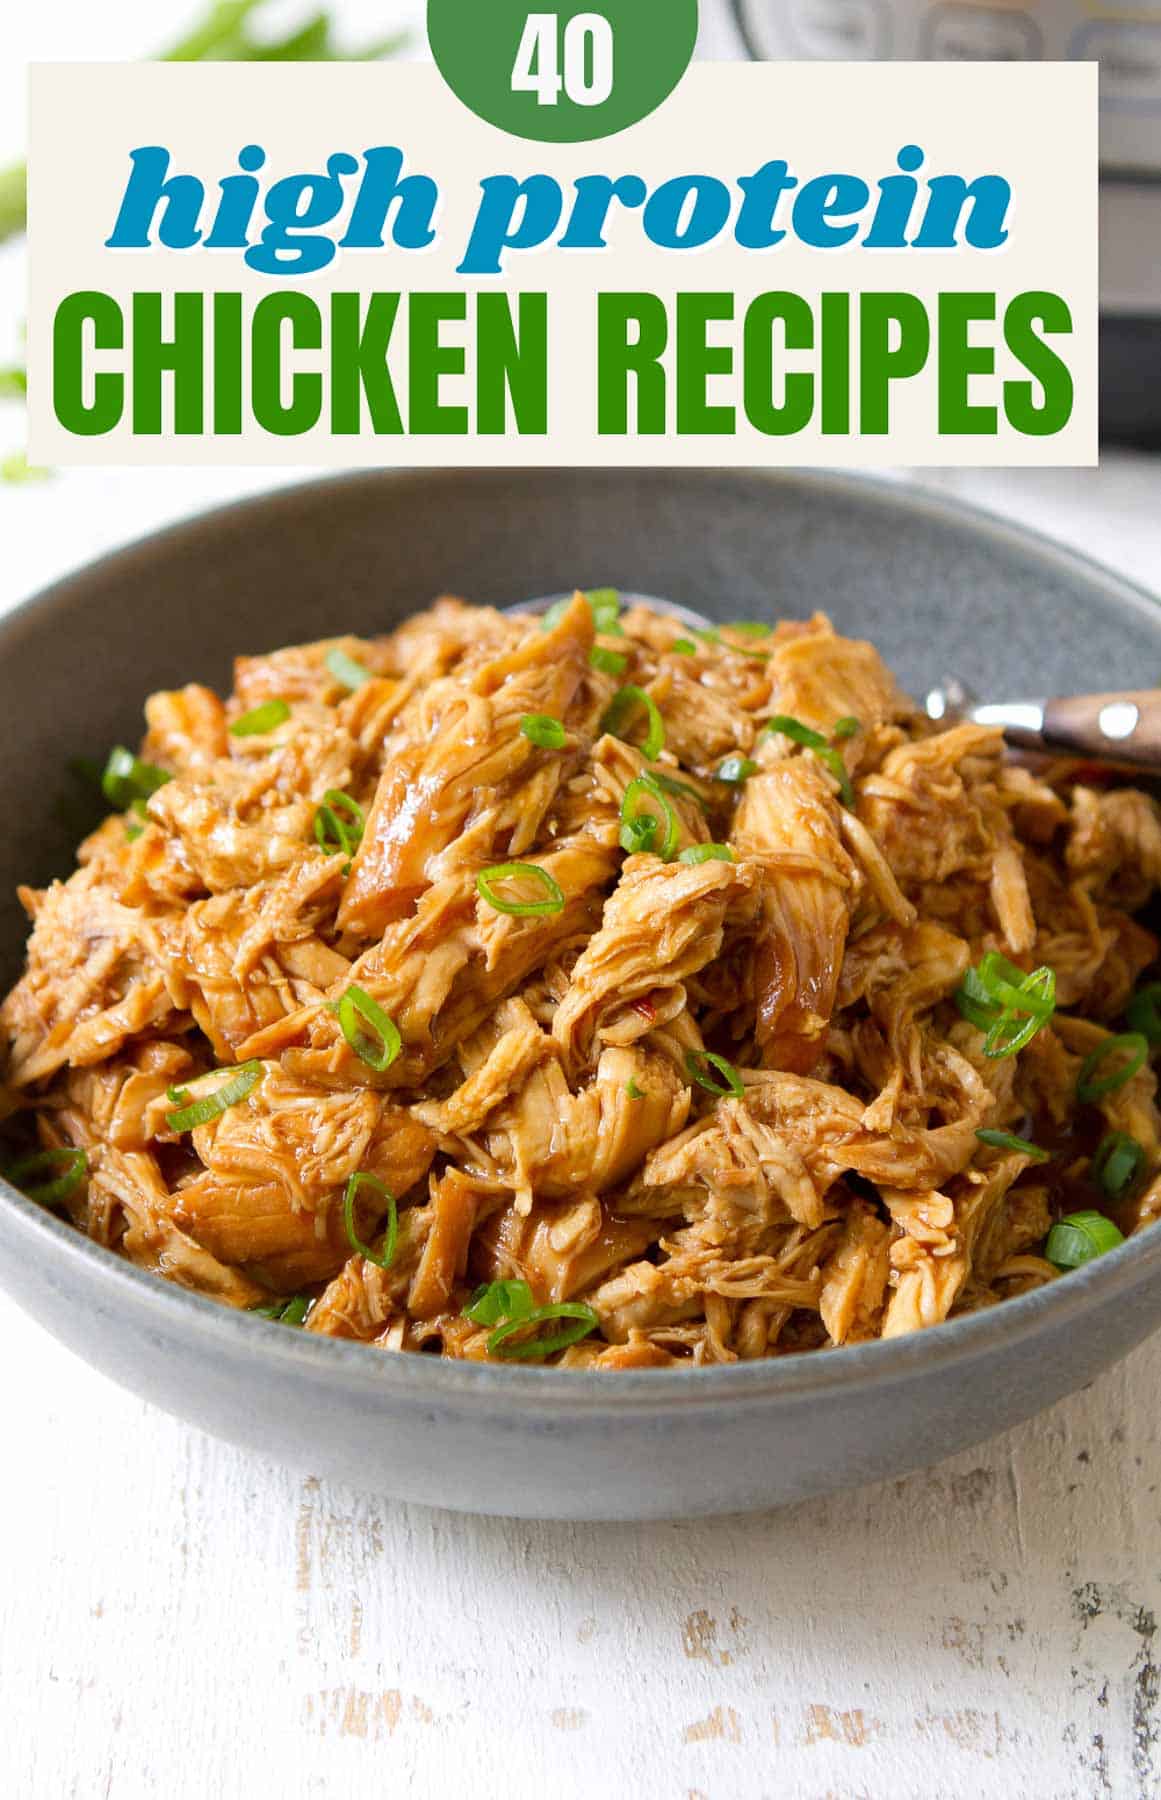 It's dinnertime and time to pump up the healthy protein! These high protein chicken recipes are the perfect blend of protein and flavor and are designed to keep you energized and satisfied throughout the day. | Recipes chicken | Recipes healthy